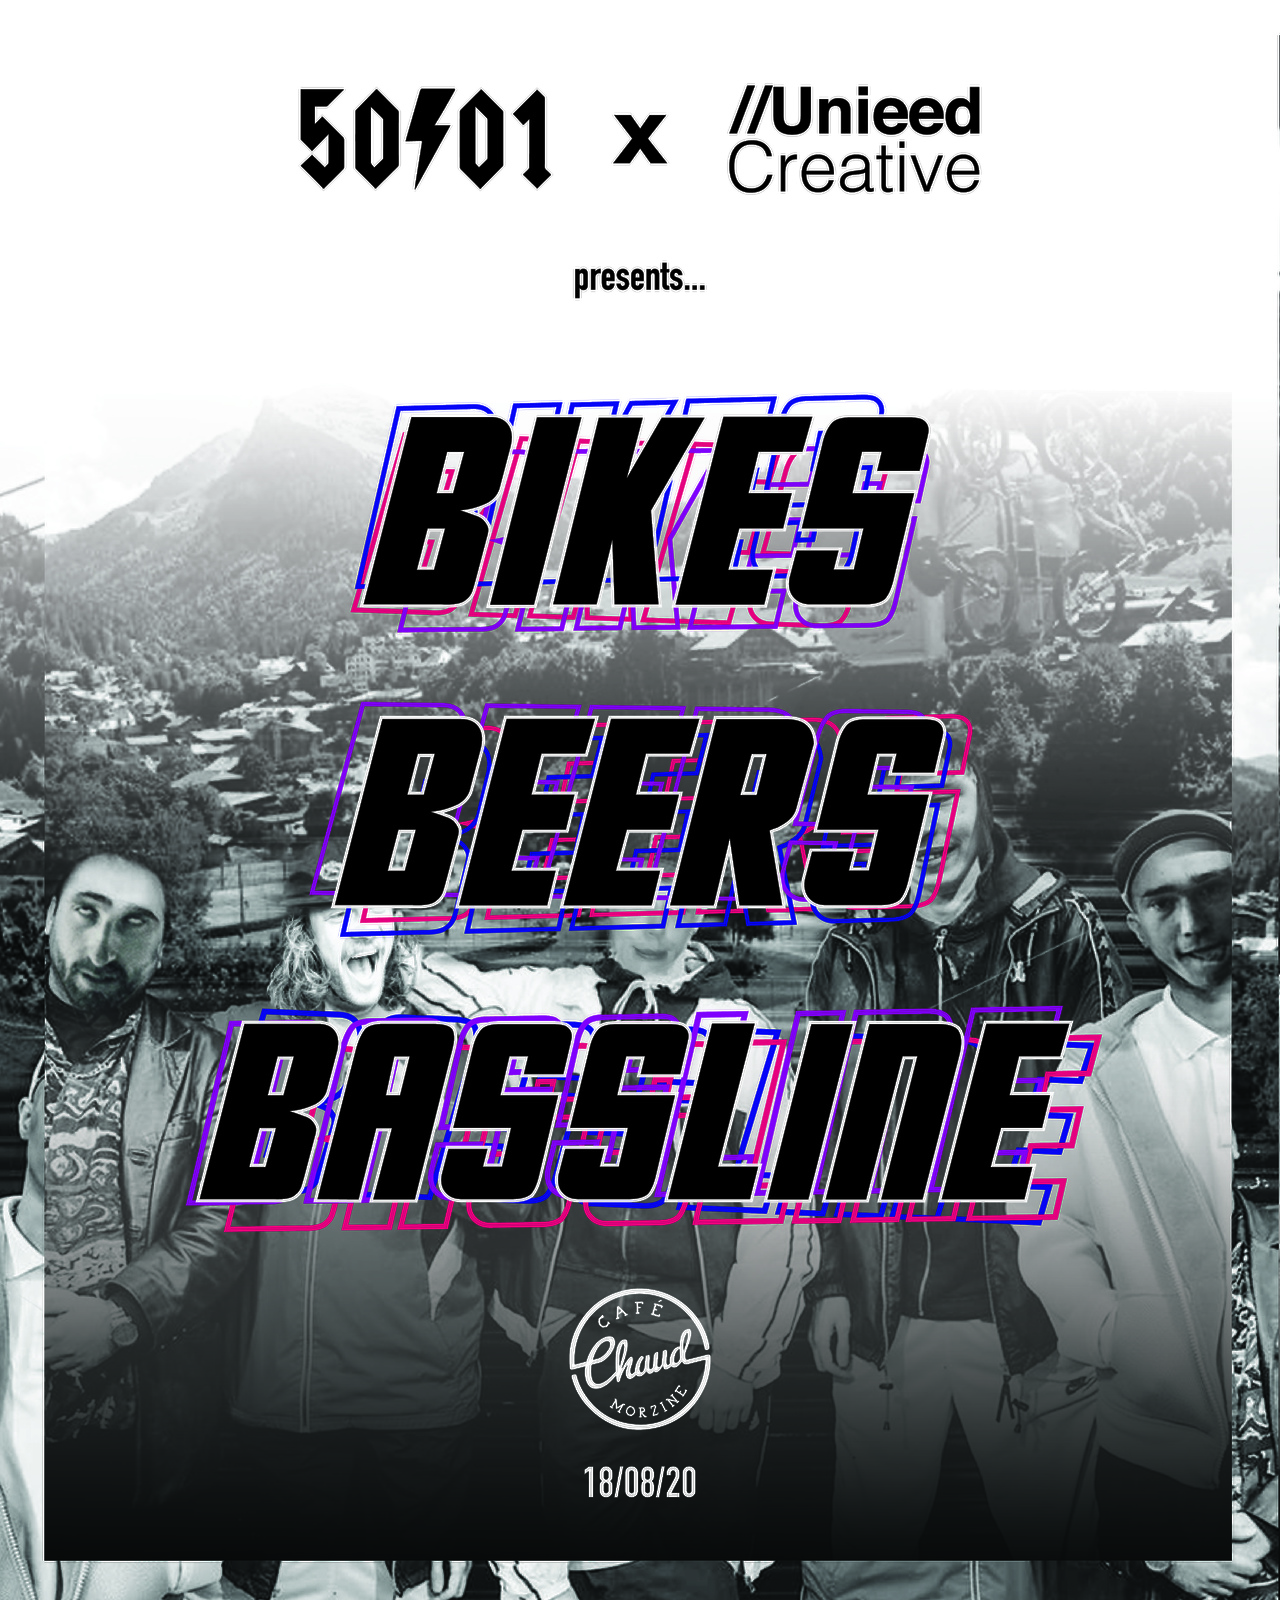 5/0to01 x Unieed Creative Presents...
/Bikes, Beers and Bassline at Cafe Chaud.
18/08/2020